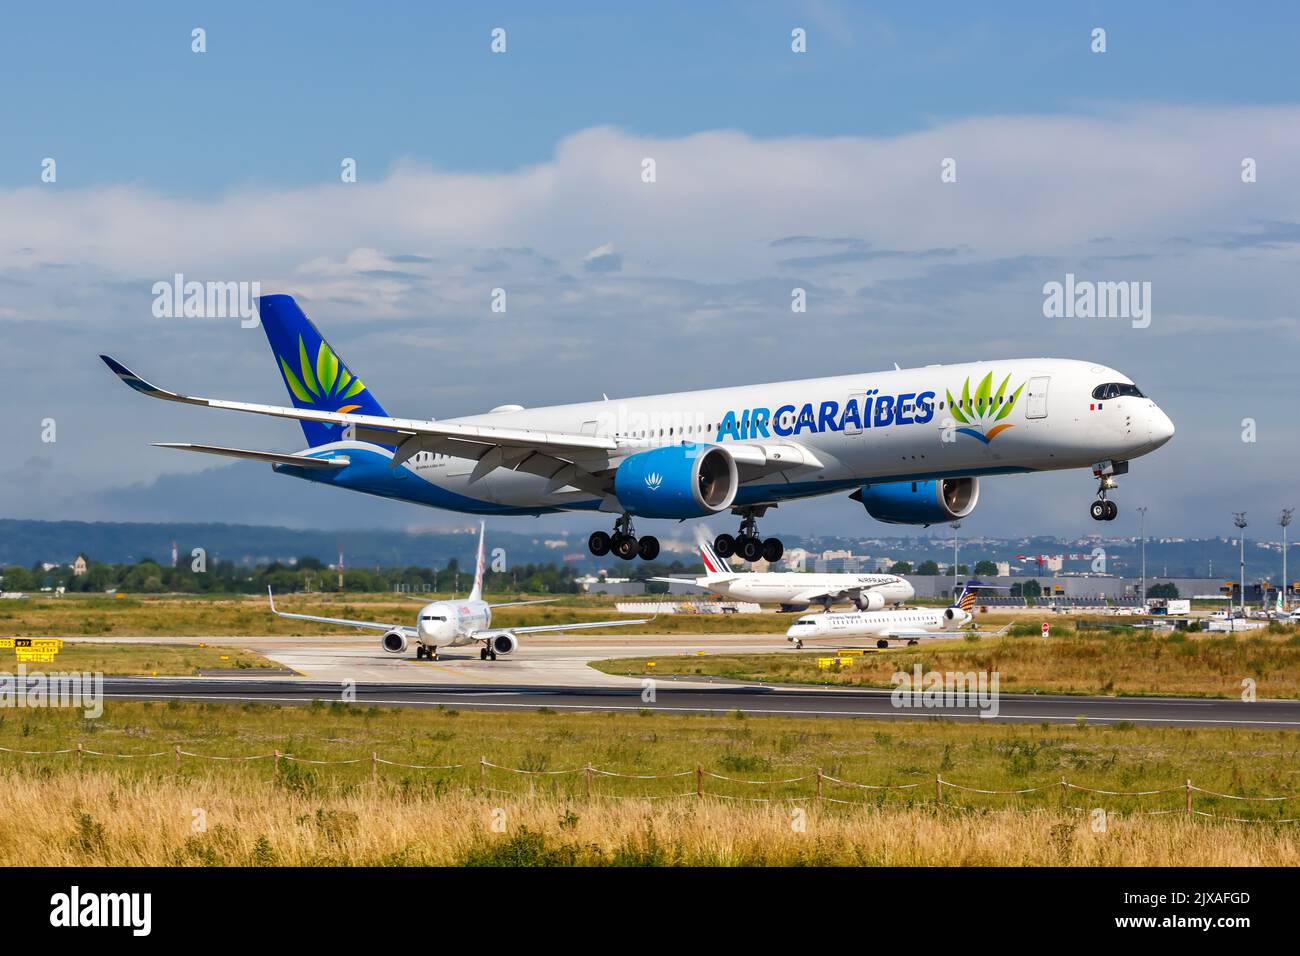 Paris, France - June 4, 2022: Air Caraibes Airbus A350-900 airplane at Paris Orly airport (ORY) in France. Stock Photo